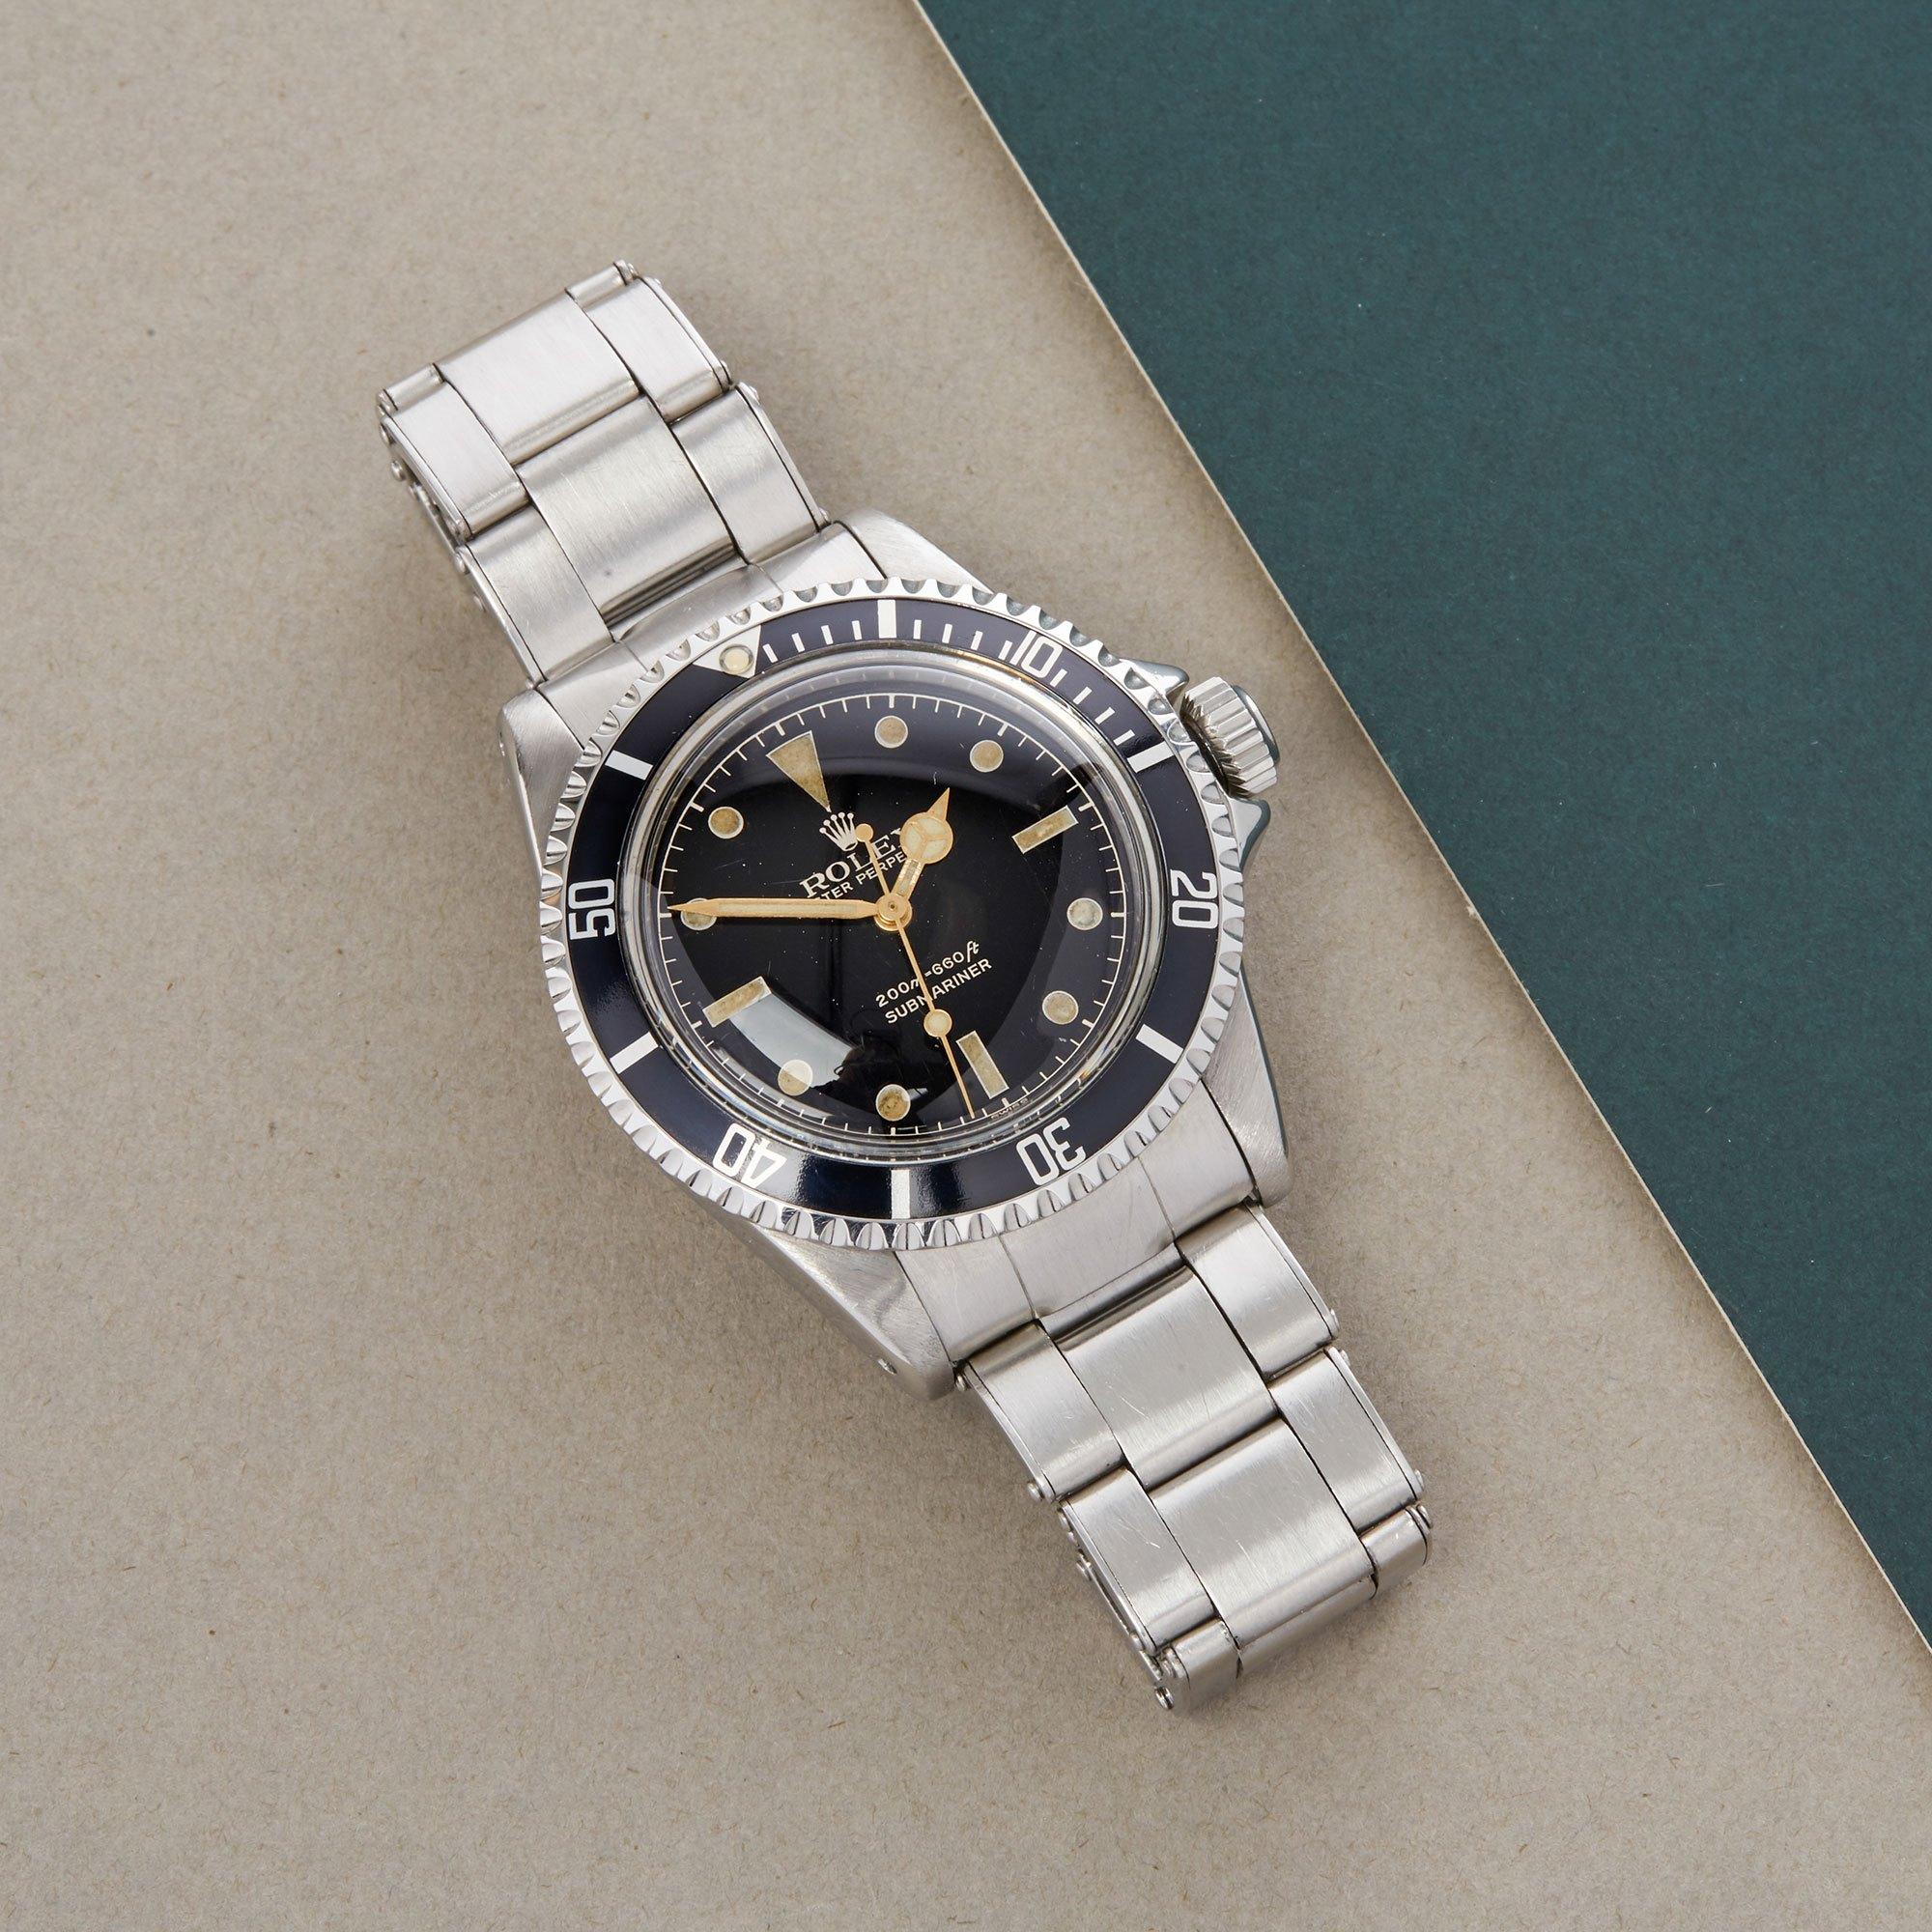 Xupes Reference: COM002772
Manufacturer: Rolex
Model: Submariner
Model Variant: Non Date
Model Number: 5512
Age: 28-04-1962
Gender: Men
Complete With: Rolex Box, Manuals, Chronometer Test Slip and Open Guarantee
Dial: Black Gloss Gilt Meters